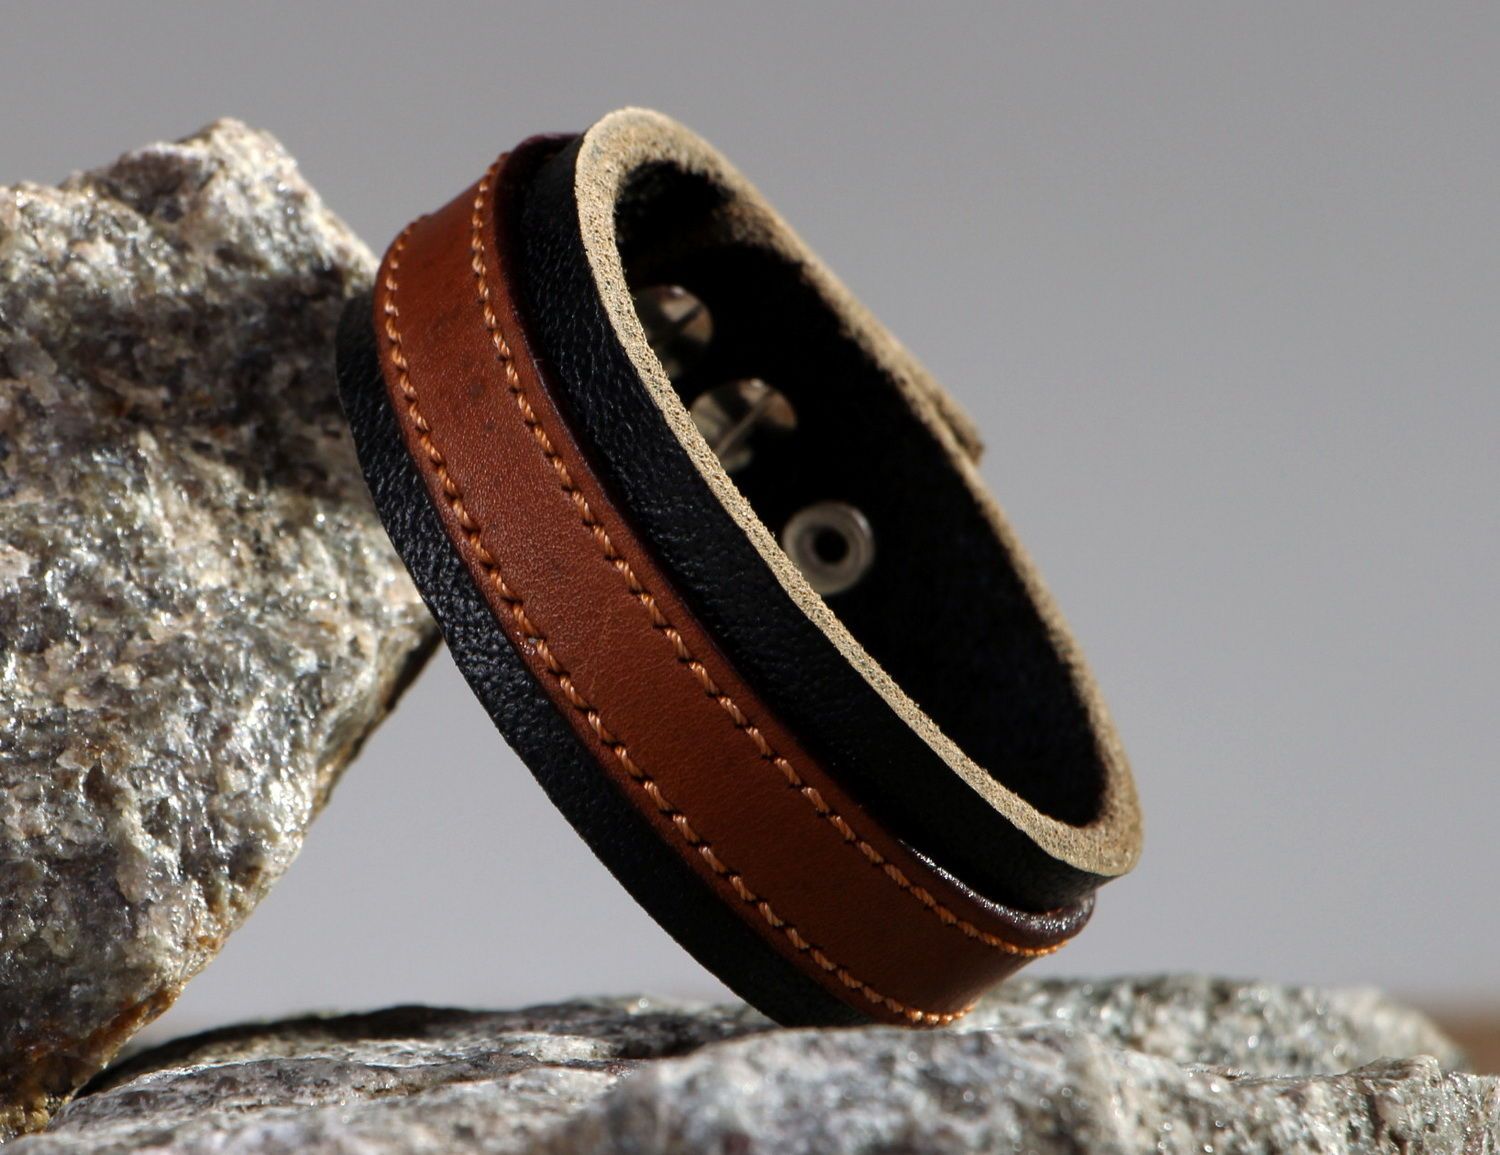 Bracelet of the two types of leather photo 1